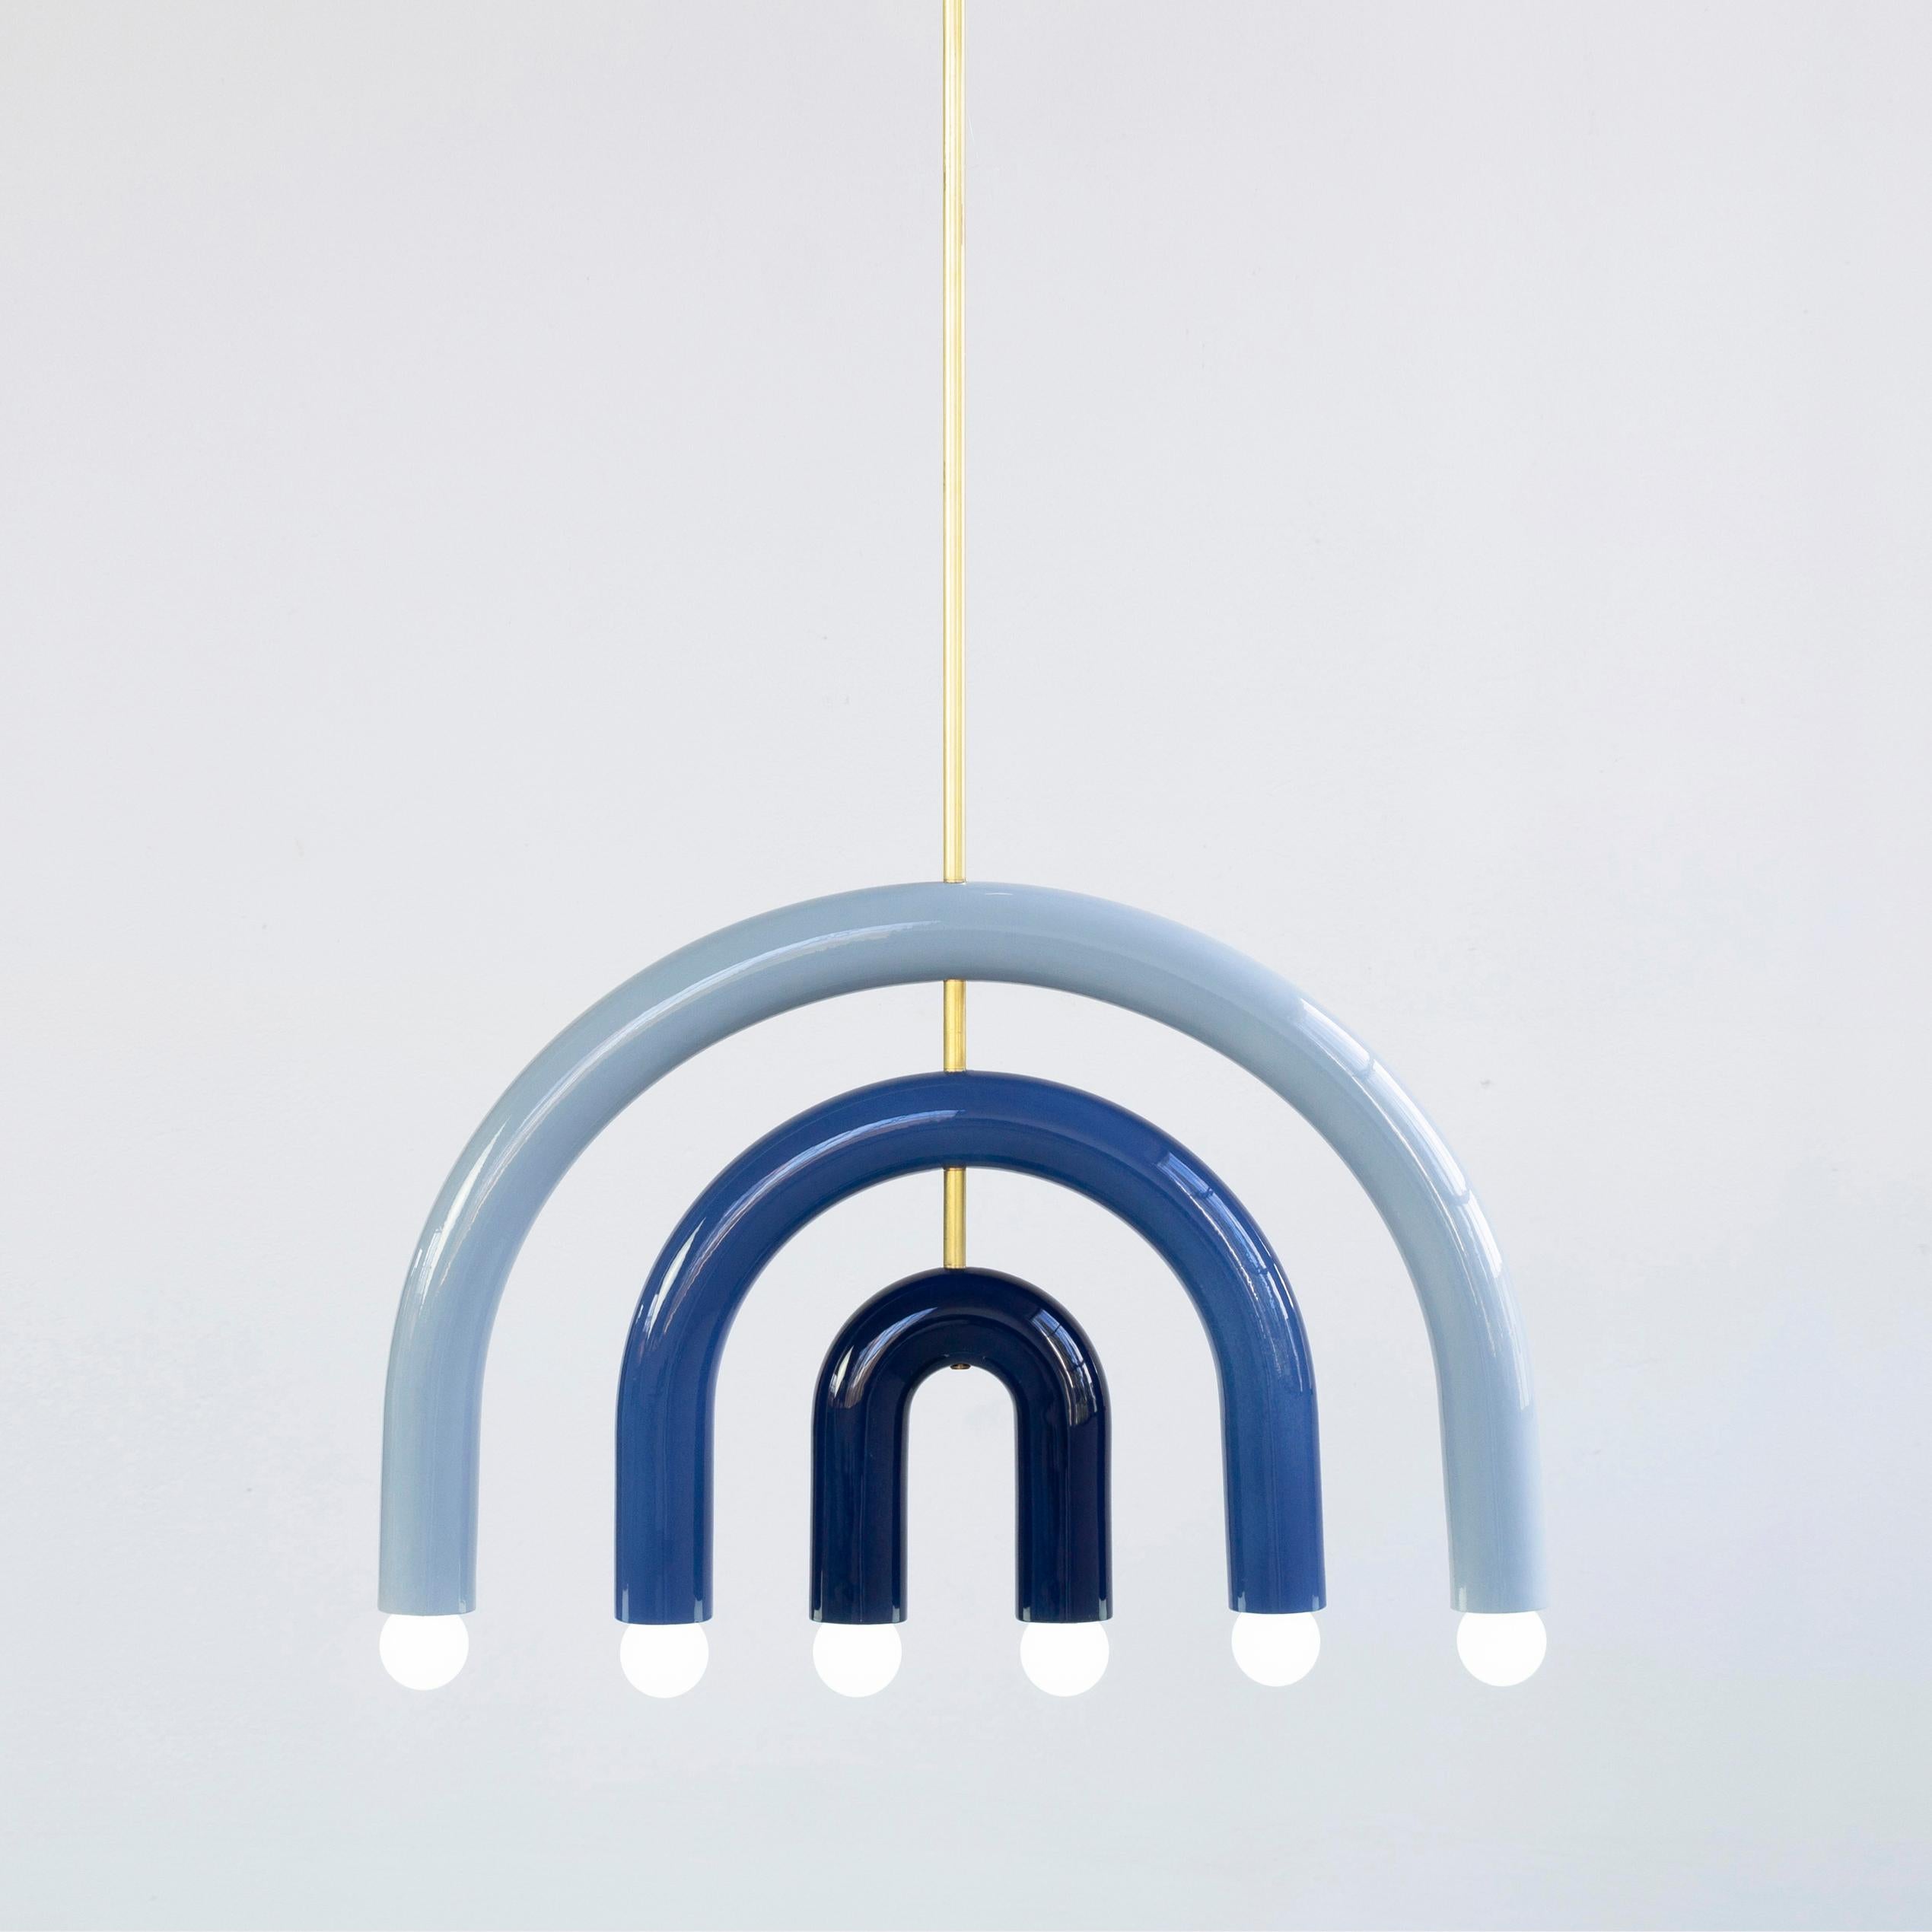 The lighting fixture is part of TRN collection. Three dimensional objects inspired by Tarasin painting have a simple calligraphic form so they can play and talk together as if they were letters from a non-existent alphabet.
 
The hand crafted